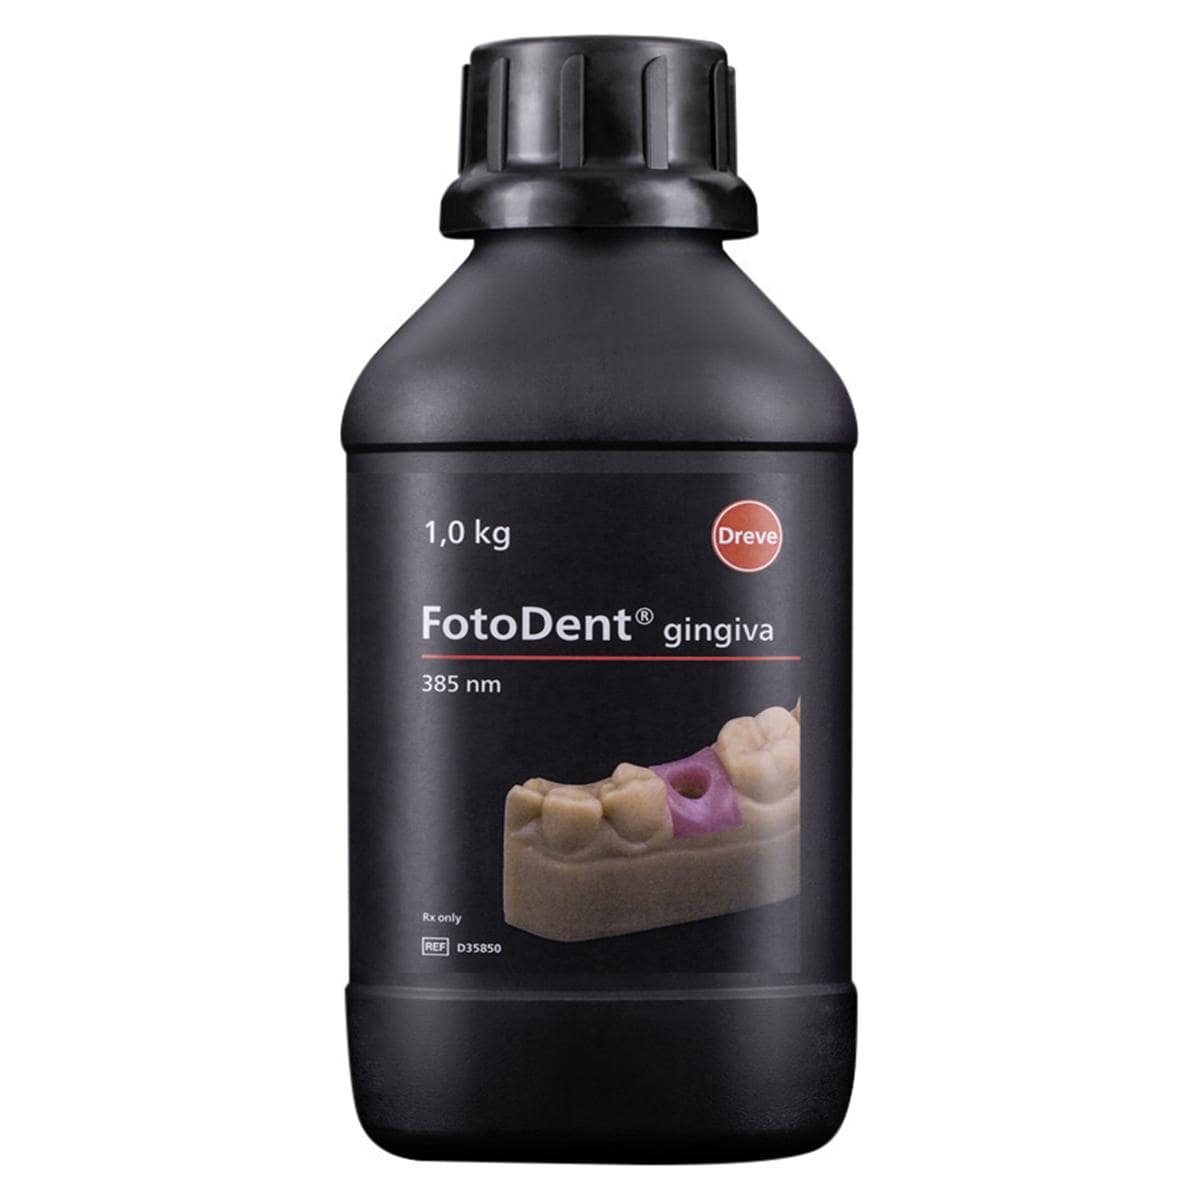 FotoDent® gingiva 385 nm - Flasche 1.000 g